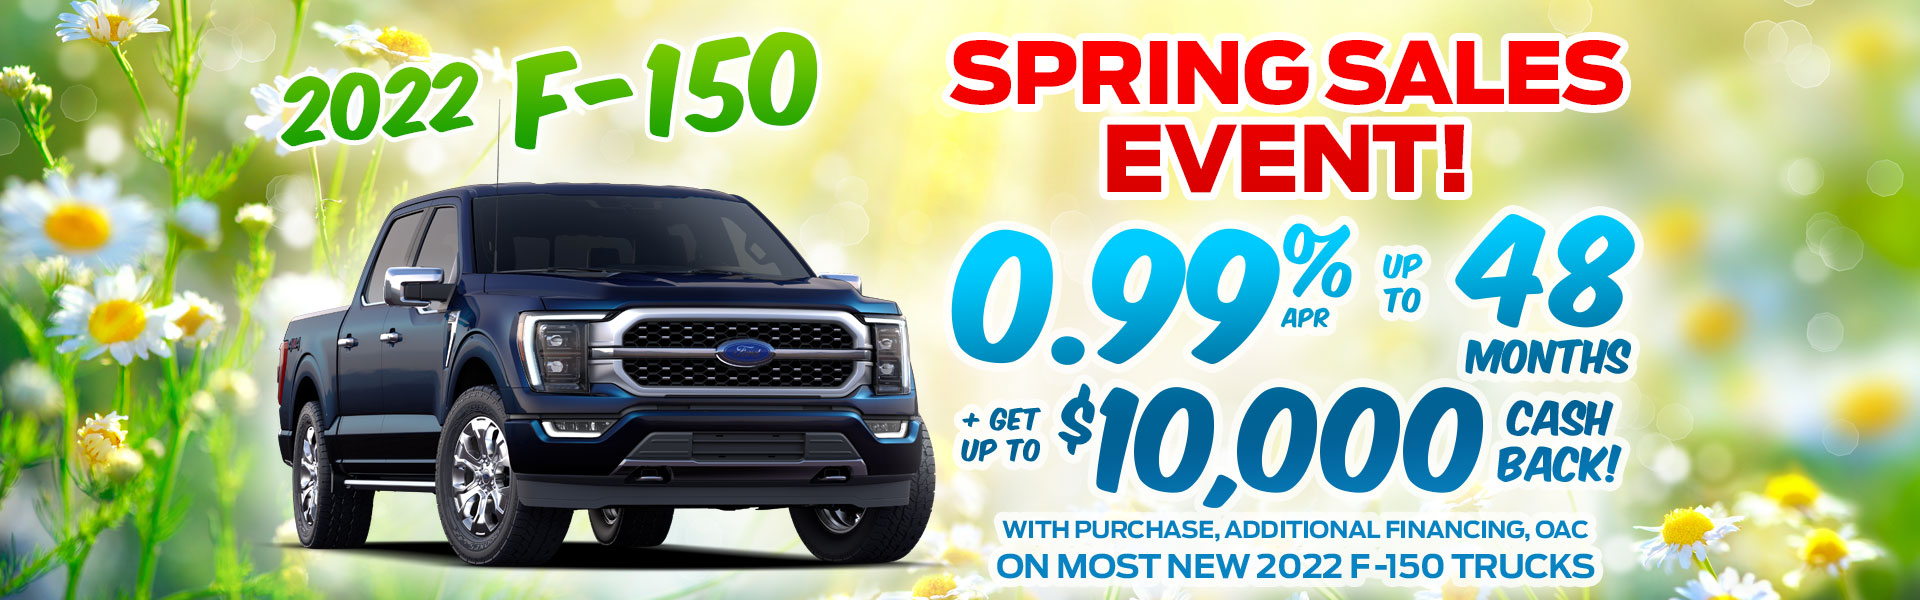 2022 Ford F-150 Spring Sales Event